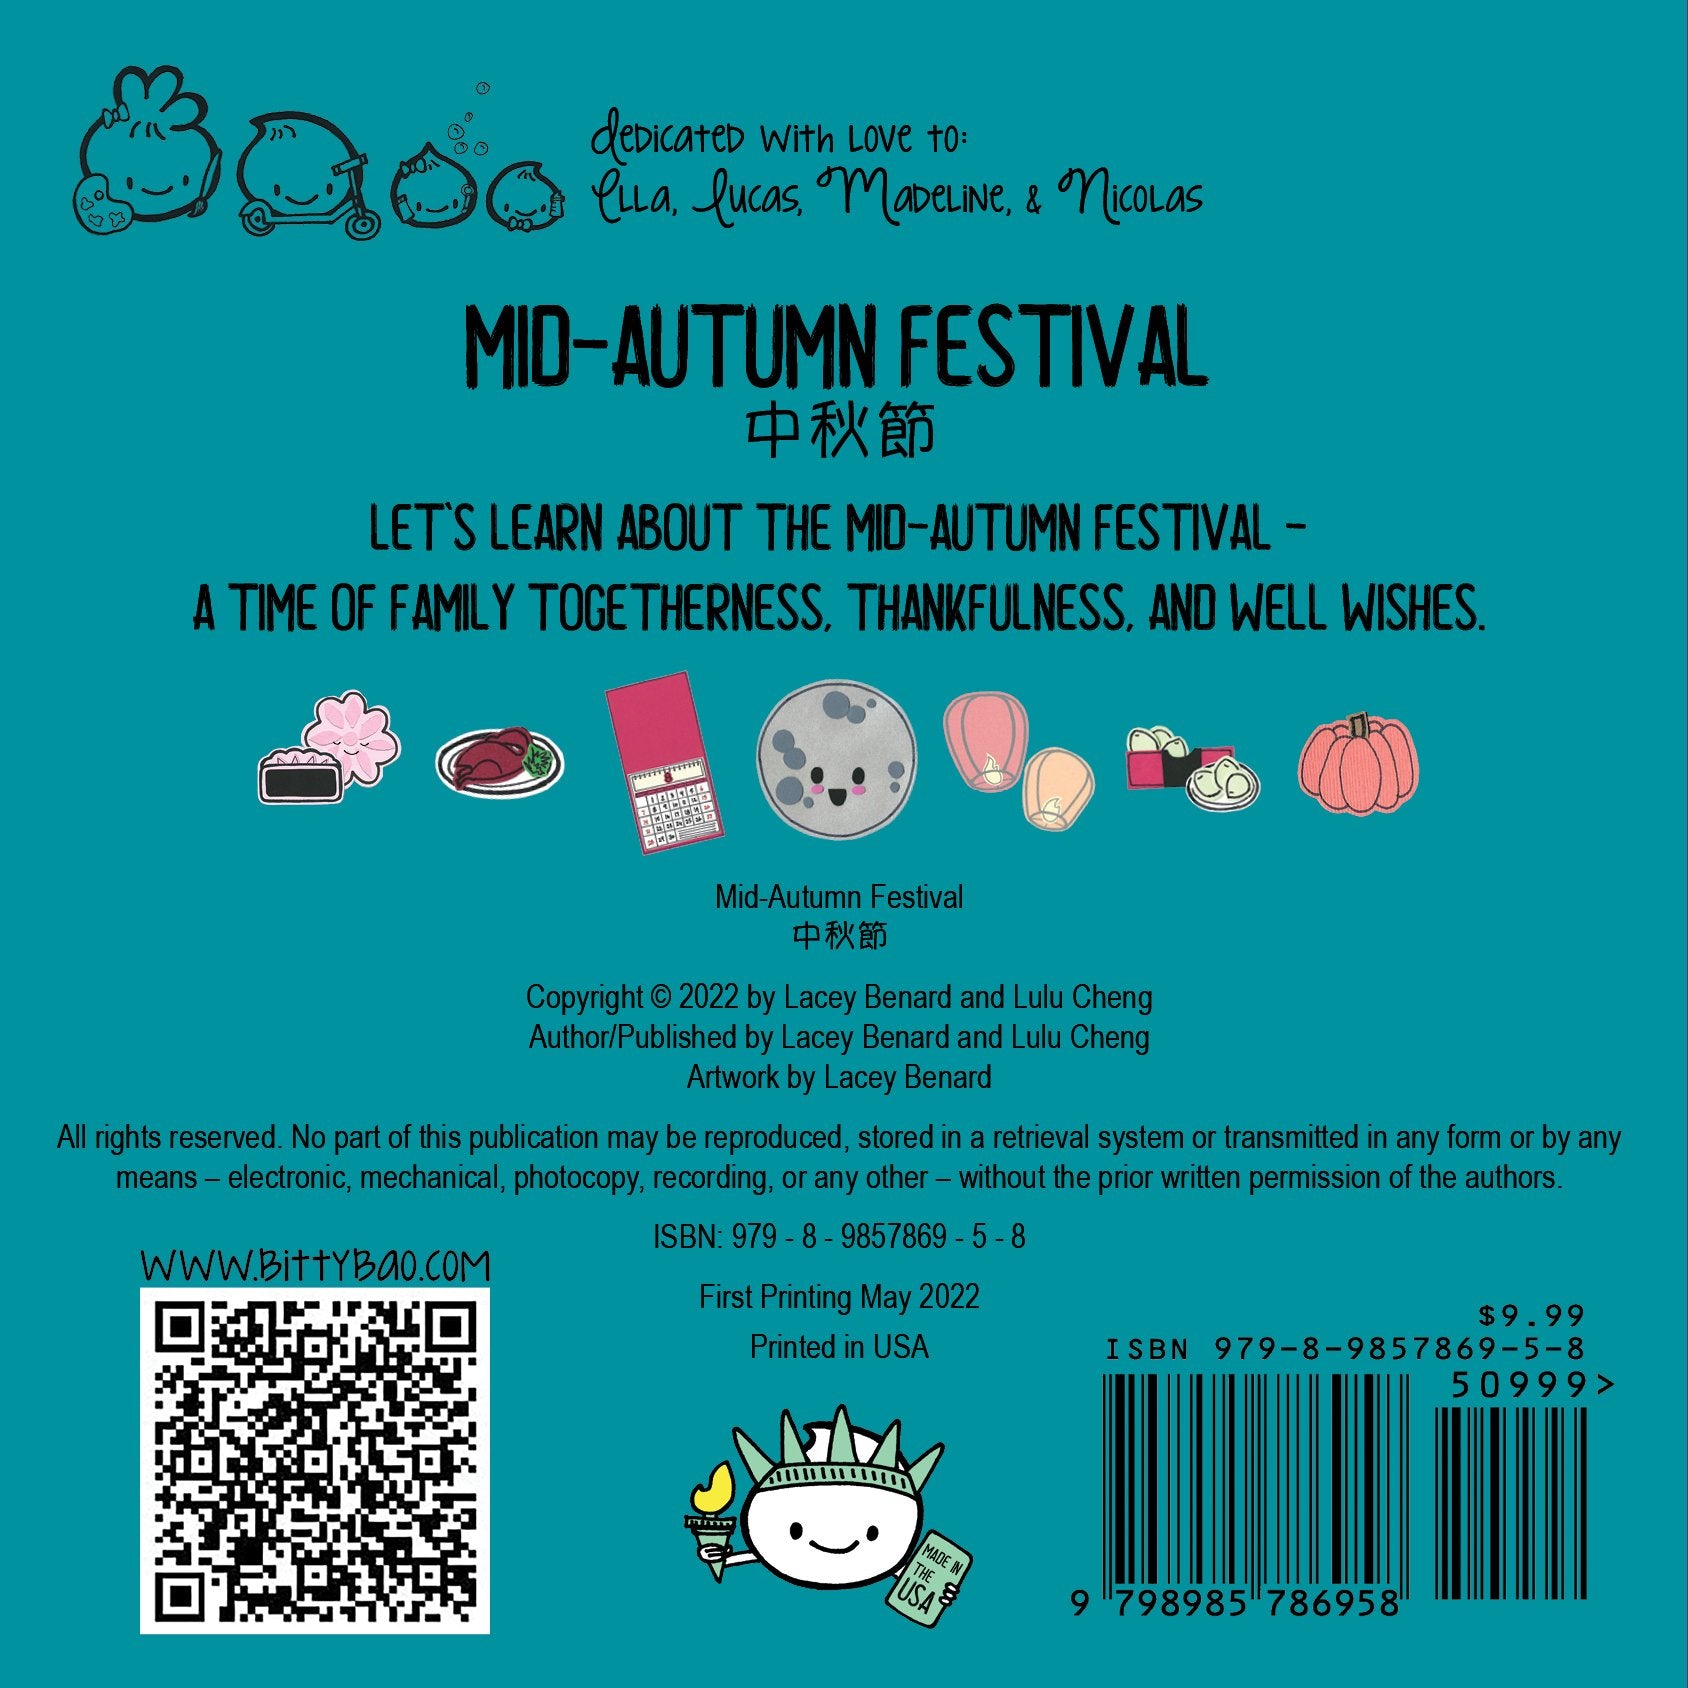 Mid-Autumn Festival 中秋節 back cover.  Let's learn about the Mid-Autumn Festival - a time of family togetherness, thankfulness, and well wishes.